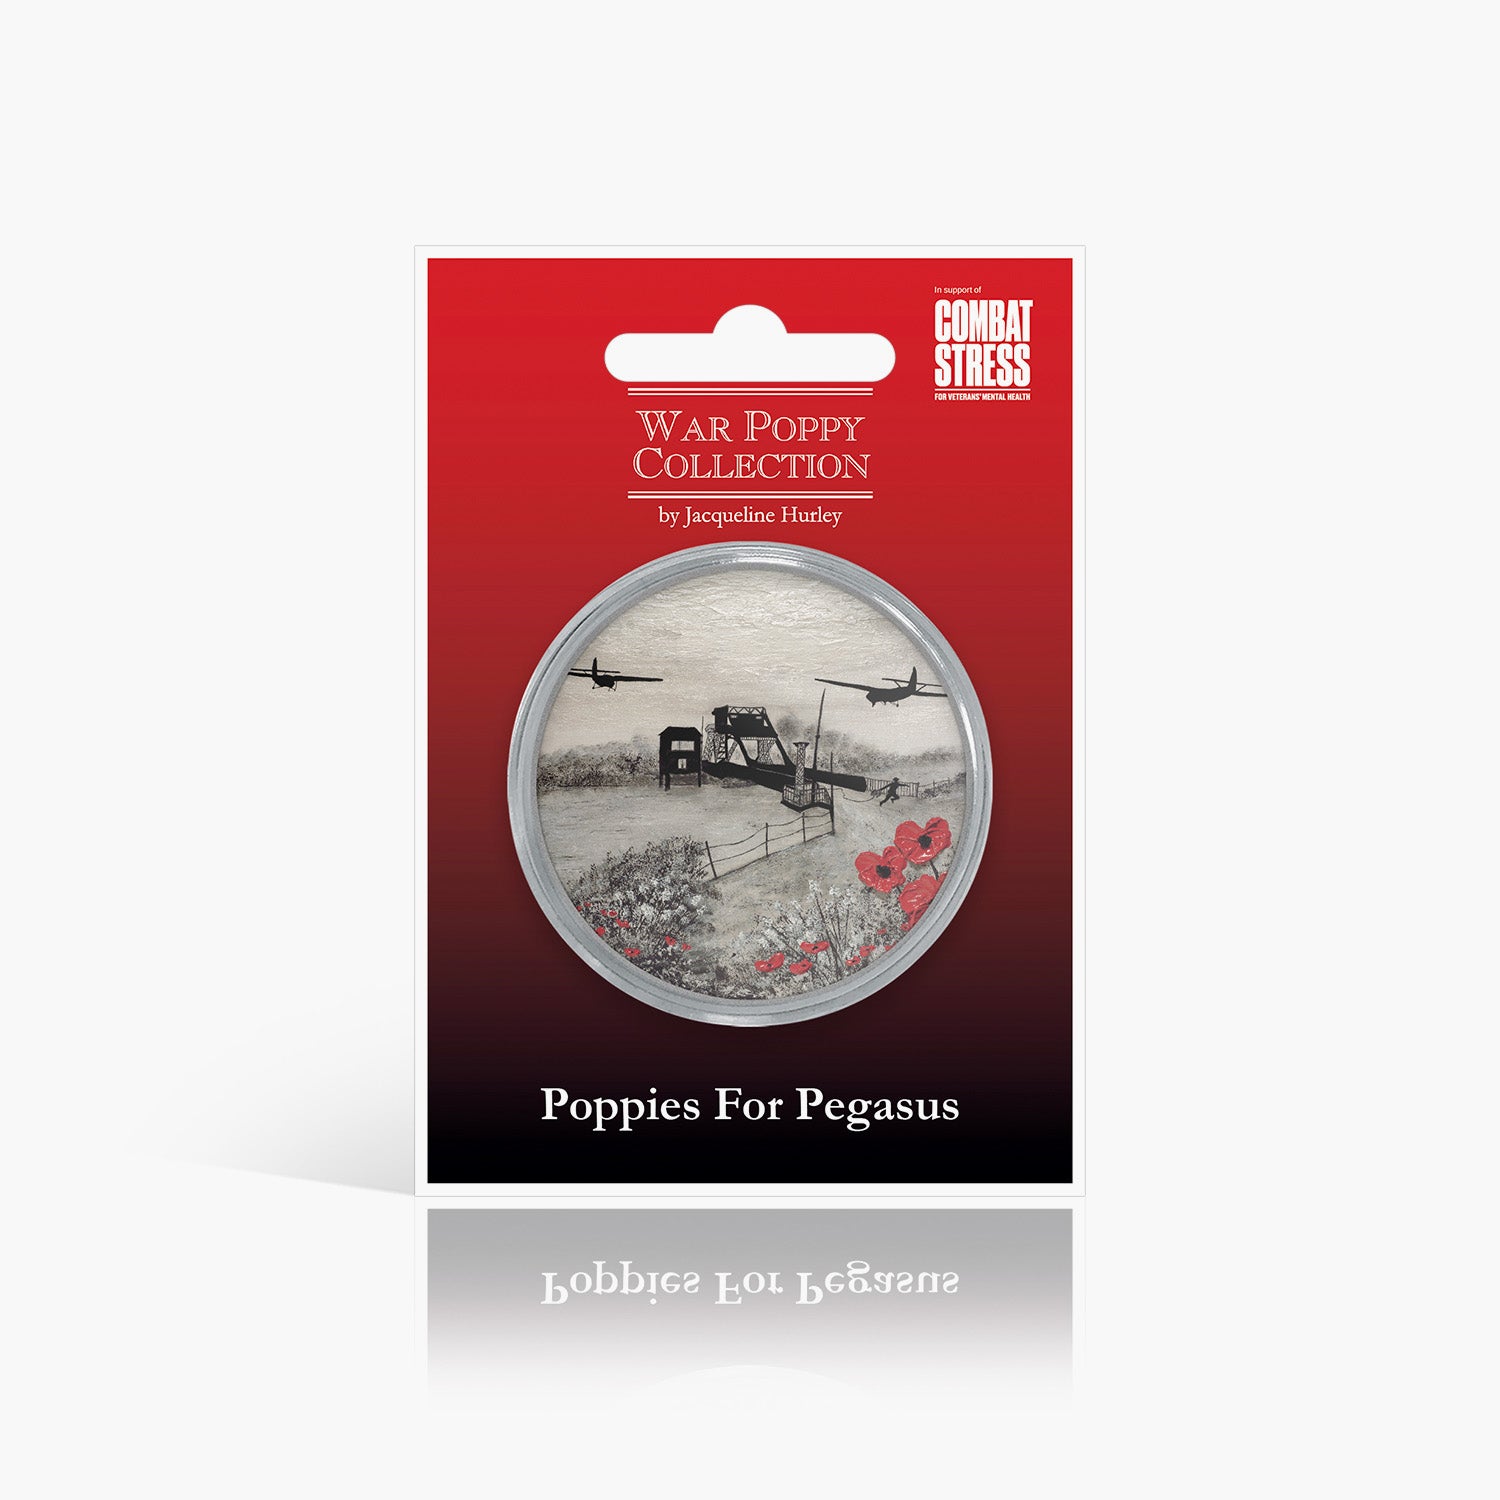 Poppies For Pegasus Silver-Plated Commemorative